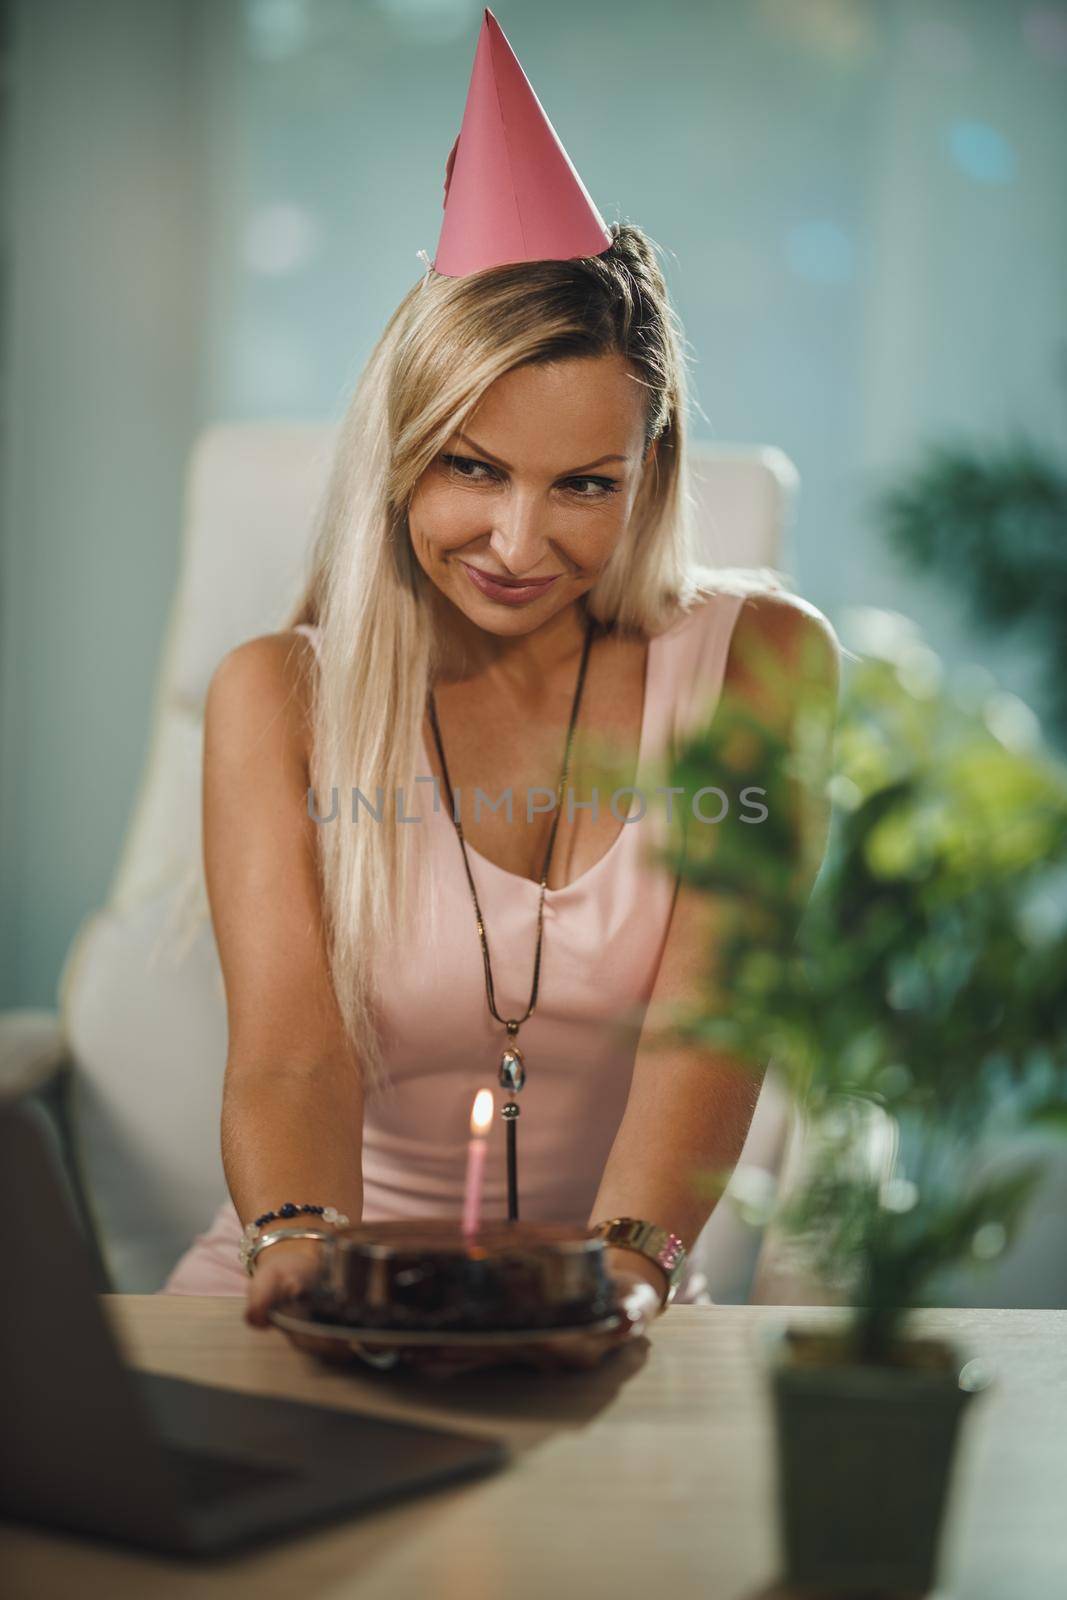 Smiling attractive woman have birthday celebration at home during pandemic isolation and have video call with friends. She holding birthday cake with lighted candles.